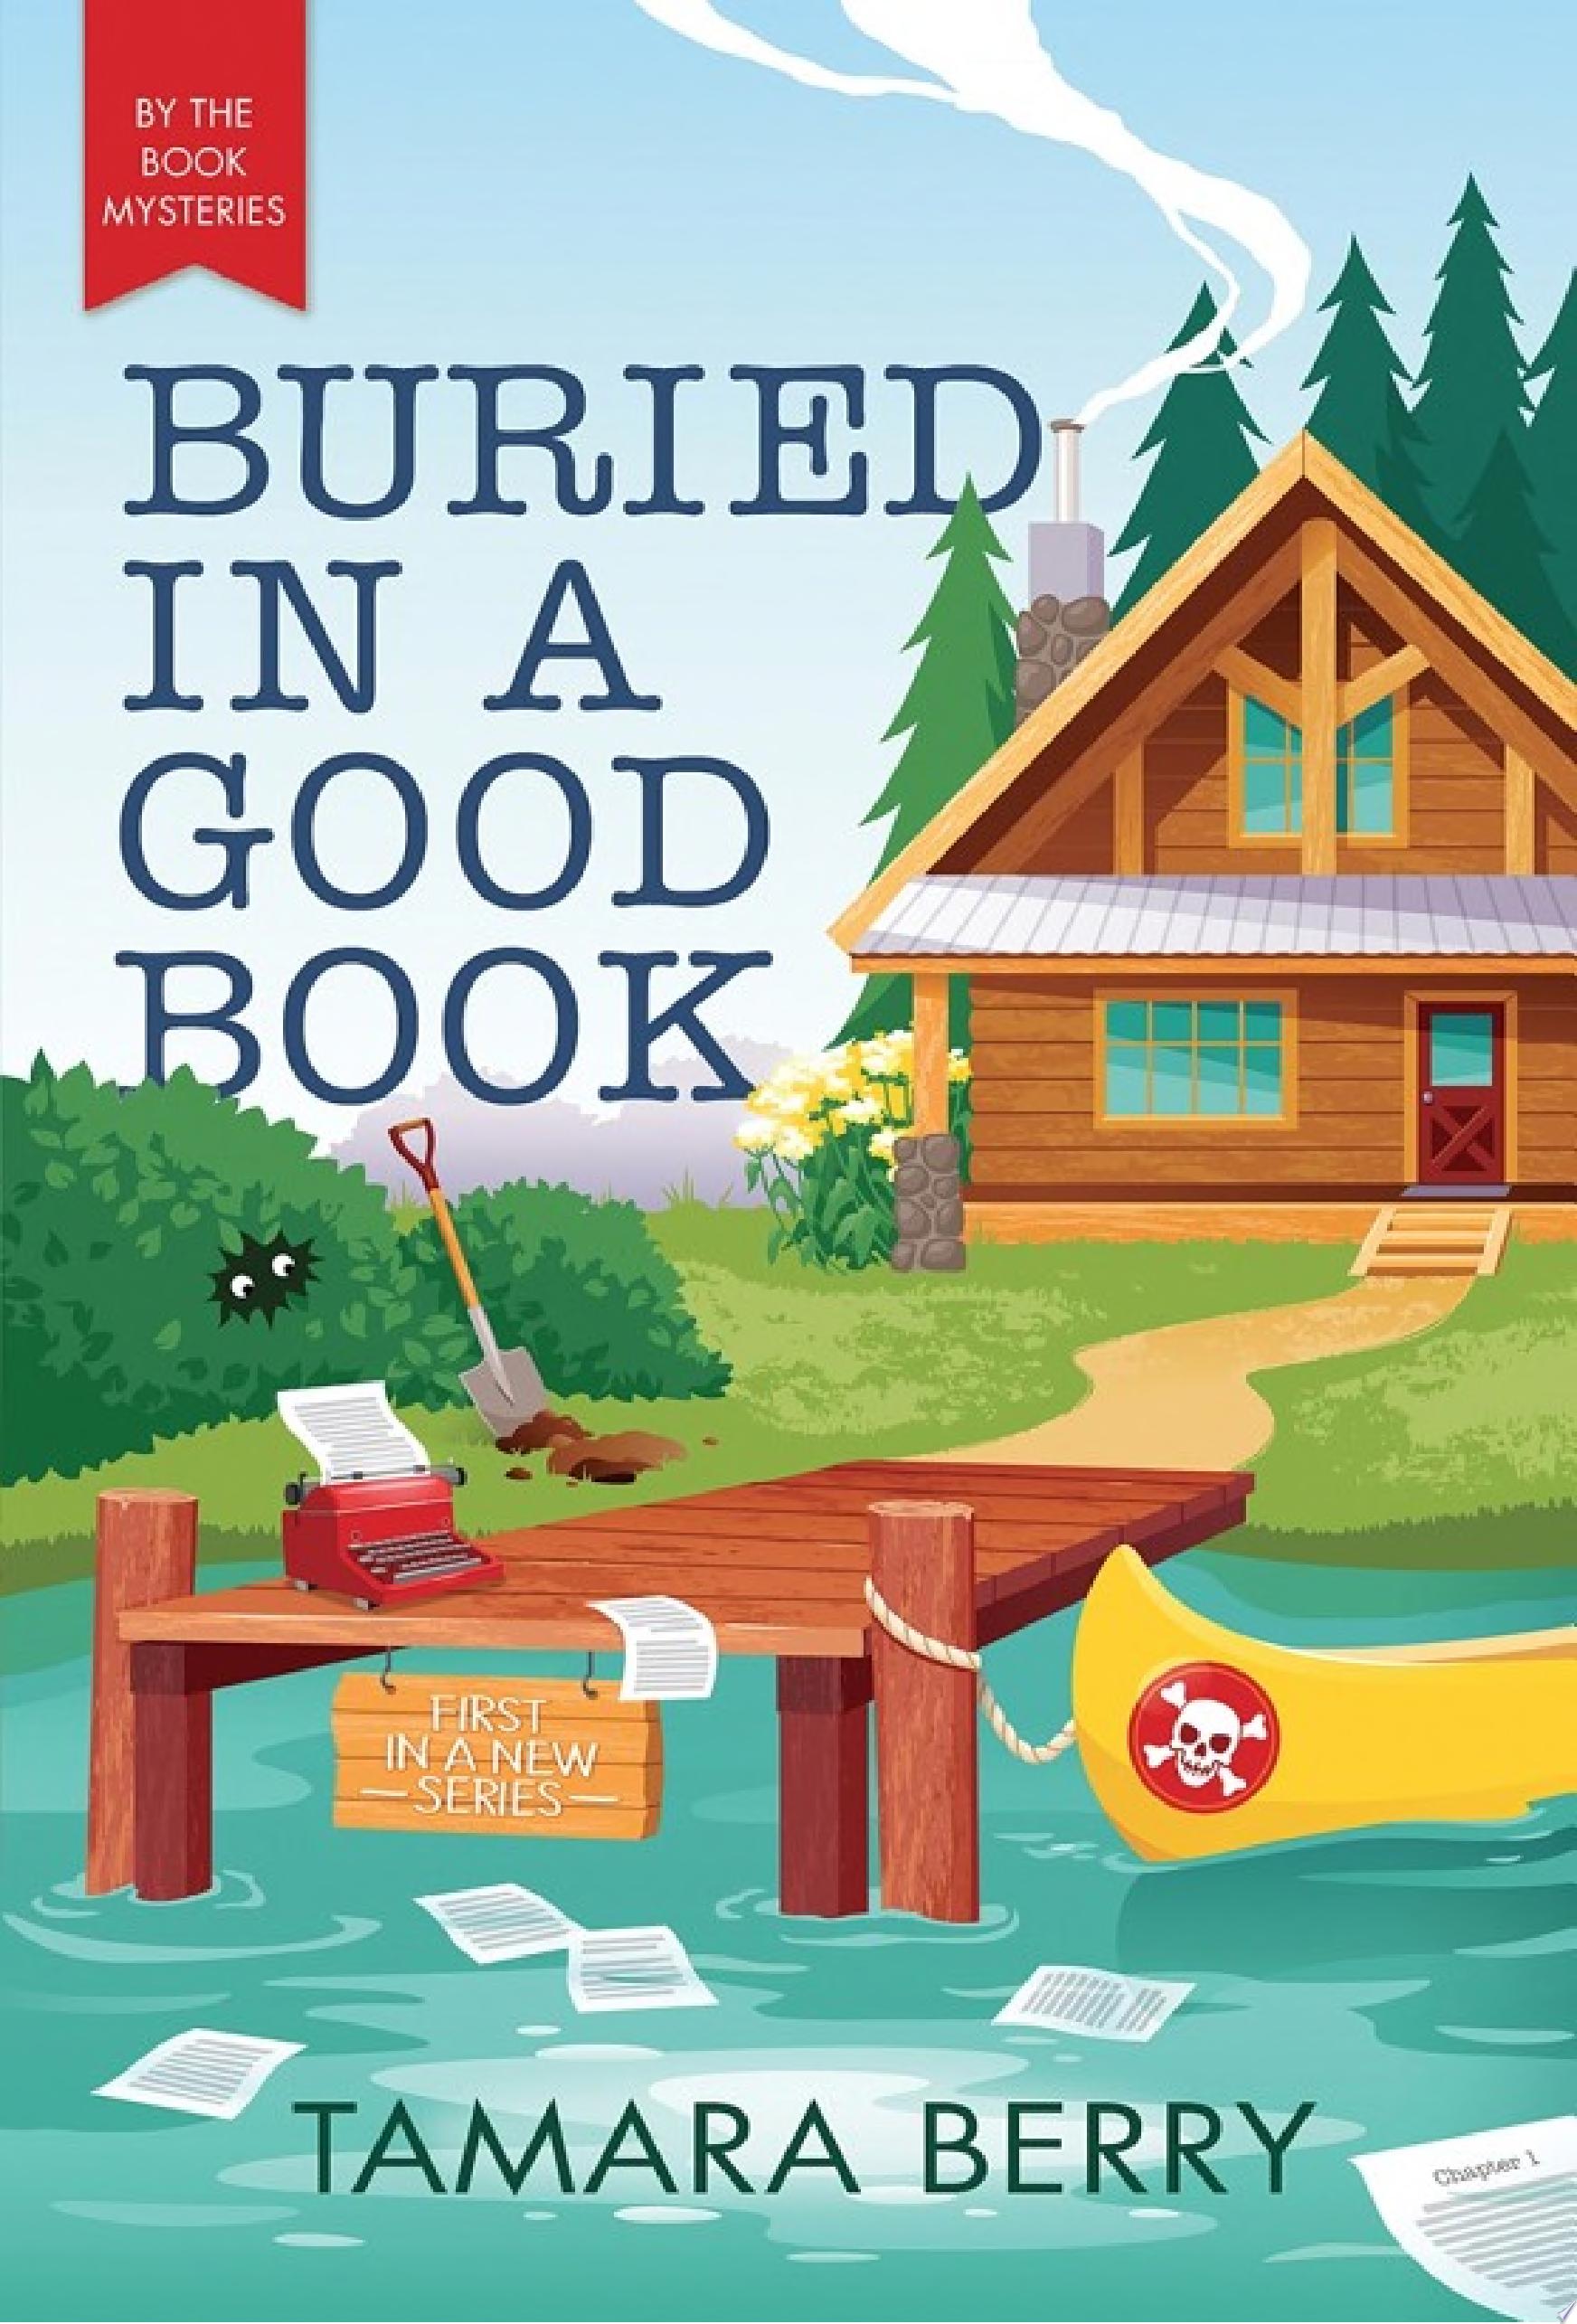 Image for "Buried in a Good Book"